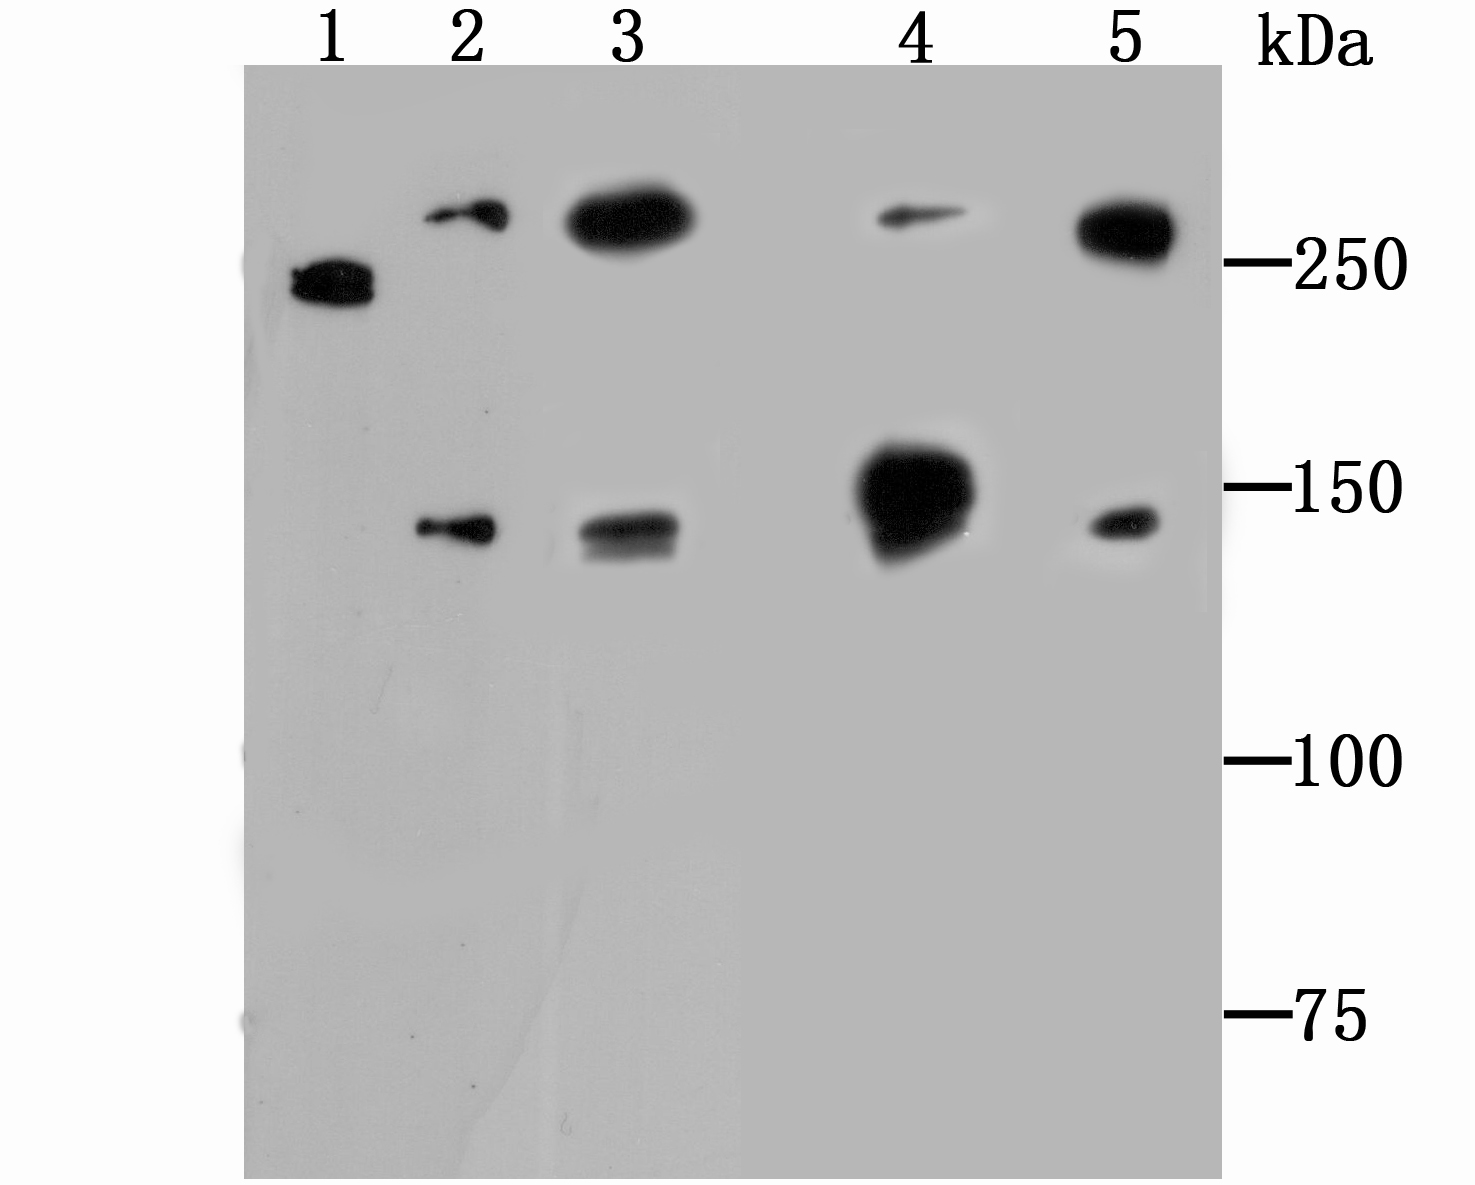 Western blot analysis of Alpha Fodrin on different lysates. Proteins were transferred to a PVDF membrane and blocked with 5% BSA in PBS for 1 hour at room temperature. The primary antibody (ET1706-44, 1/500) was used in 5% BSA at room temperature for 2 hours. Goat Anti-Rabbit IgG - HRP Secondary Antibody (HA1001) at 1:200,000 dilution was used for 1 hour at room temperature.<br />
Positive control: <br />
Lane 1: Hela cell lysate<br />
Lane 2: Jurkat cell lysate<br />
Lane 3: NIH/3T3 cell lysate<br />
Lane 4:Rat brain tissue lysate<br />
Lane 5:Mouse brain tissue lysate